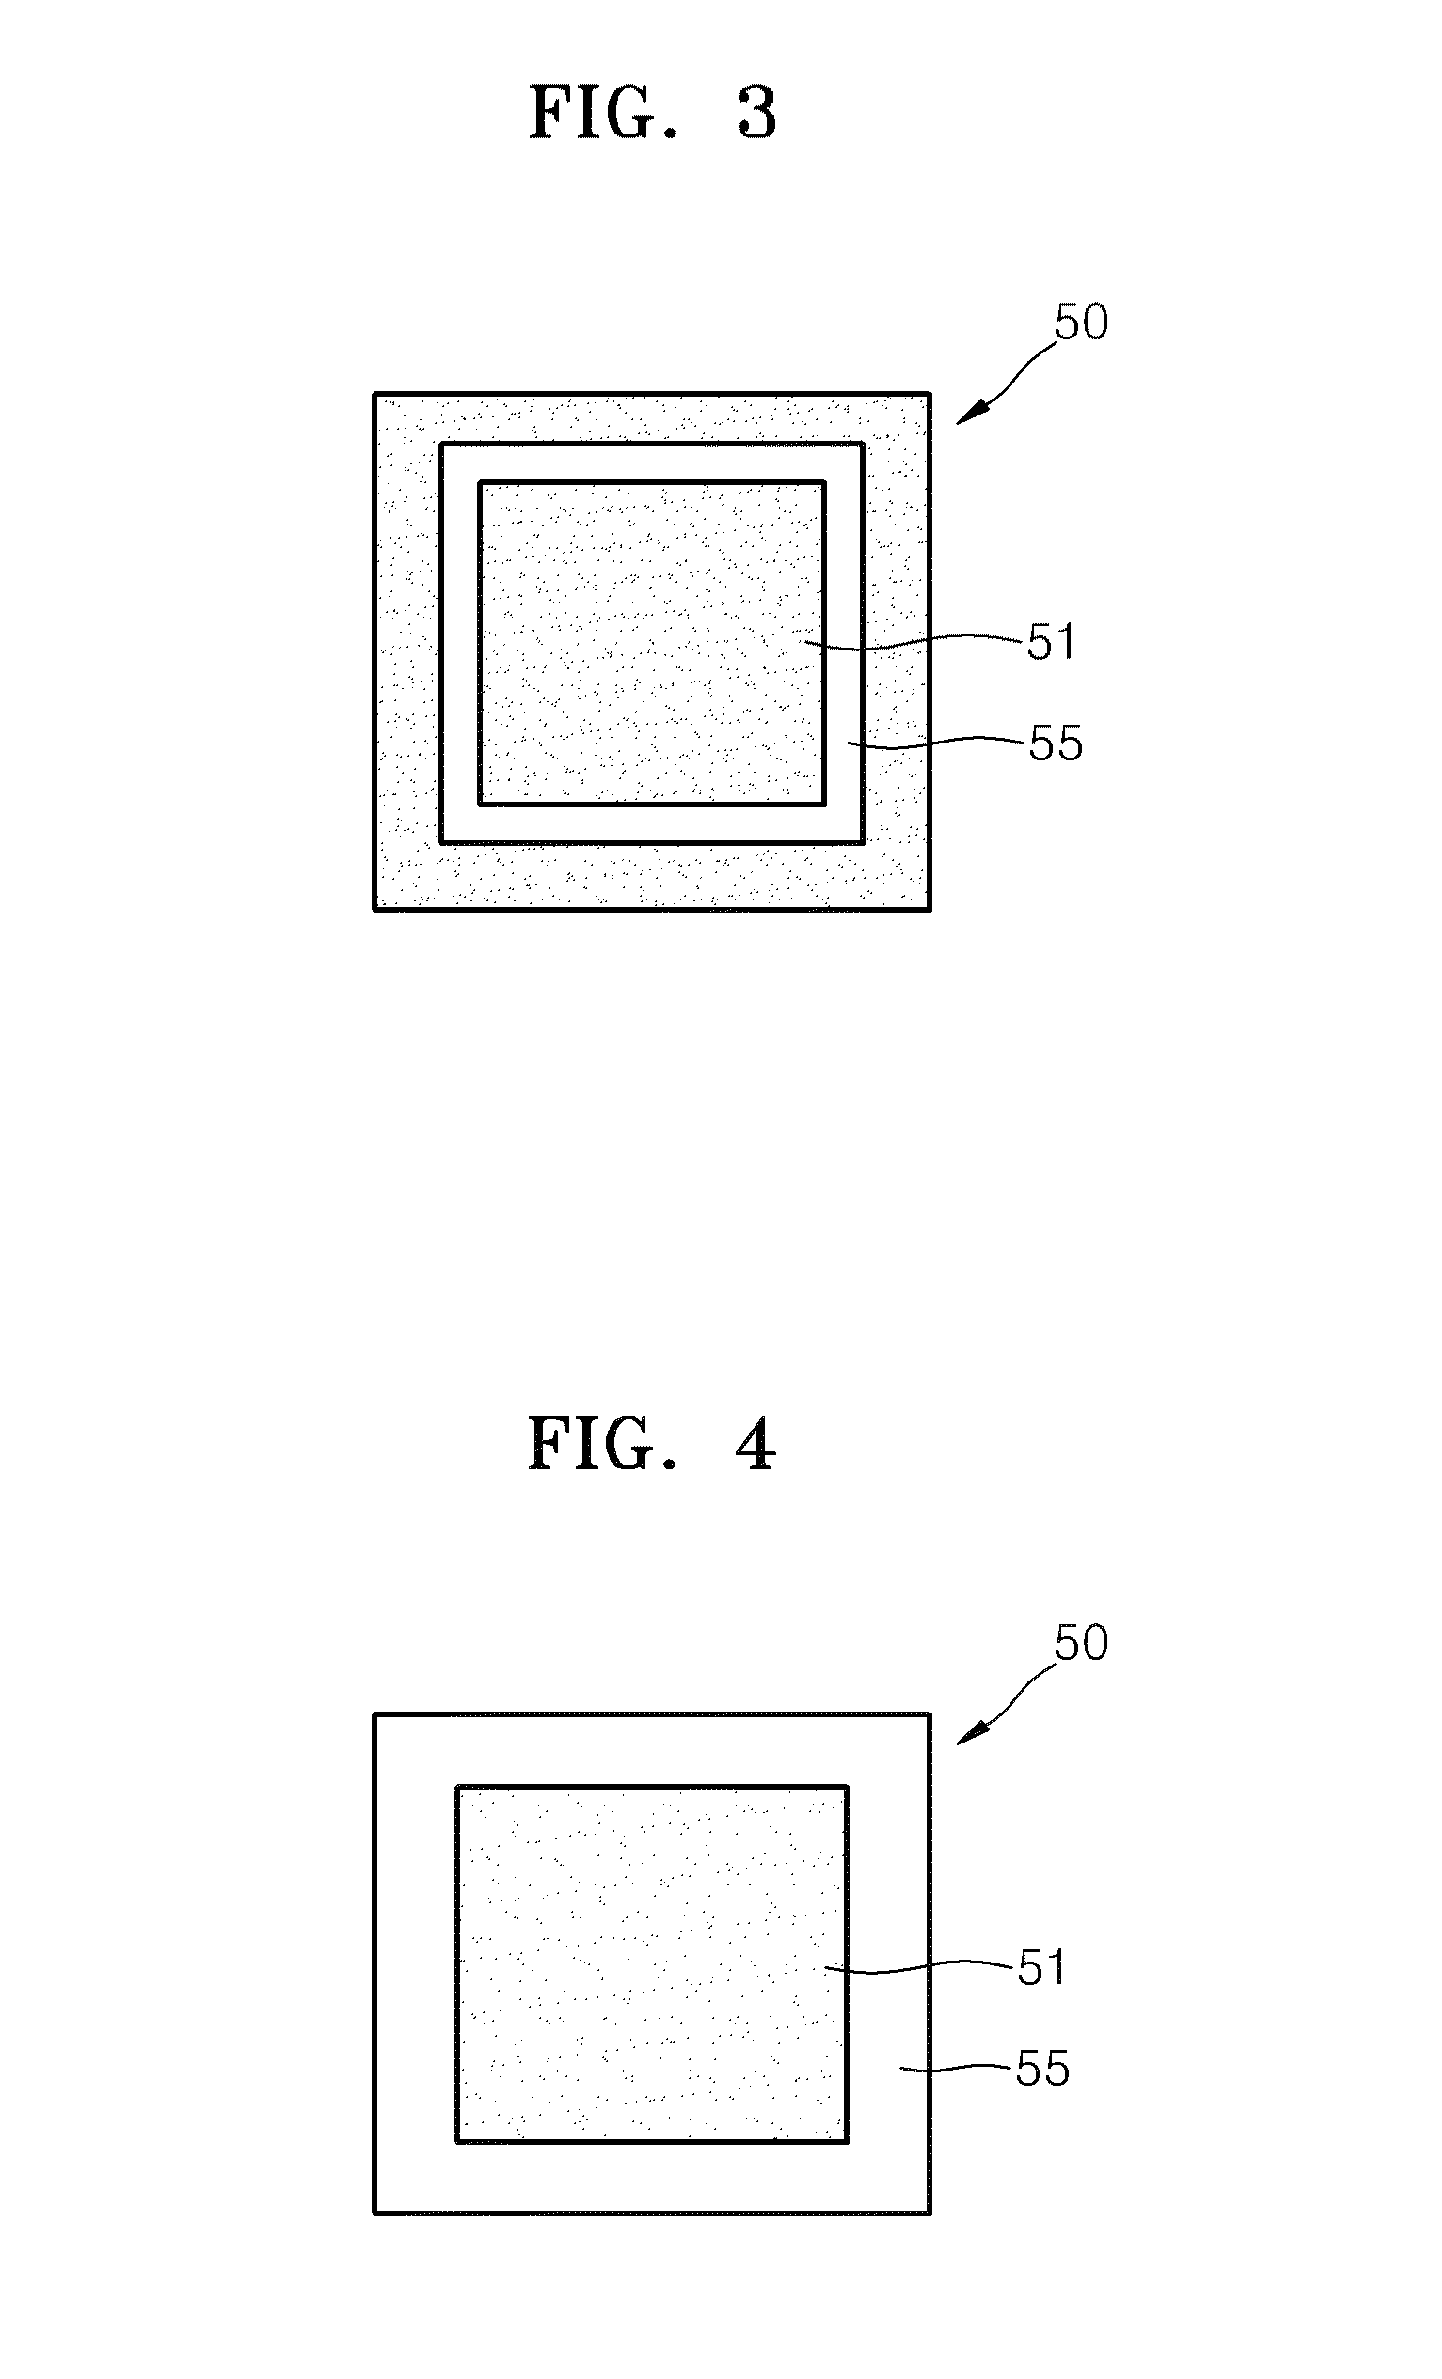 Hybrid laser light sources for photonic integrated circuits